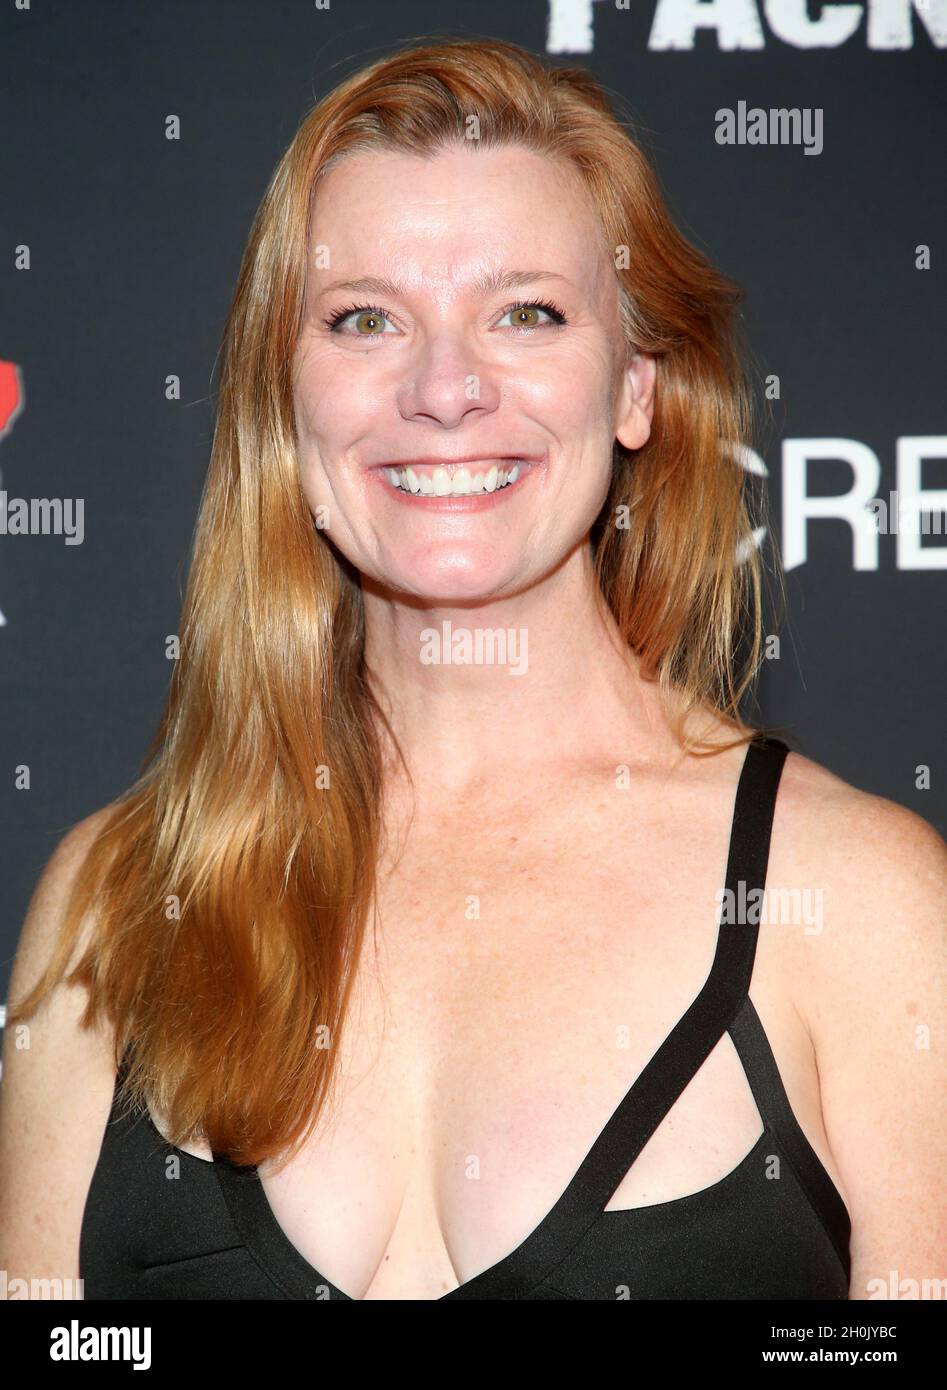 Hollywood, Ca. 12th Oct, 2021. Hope Madden, at the 21st Screamfest Opening Night Screening Of The Retaliators at Mann Chinese 6 Theatre in Hollywood, California on October 12, 2021. Credit: Faye Sadou/Media Punch/Alamy Live News Stock Photo